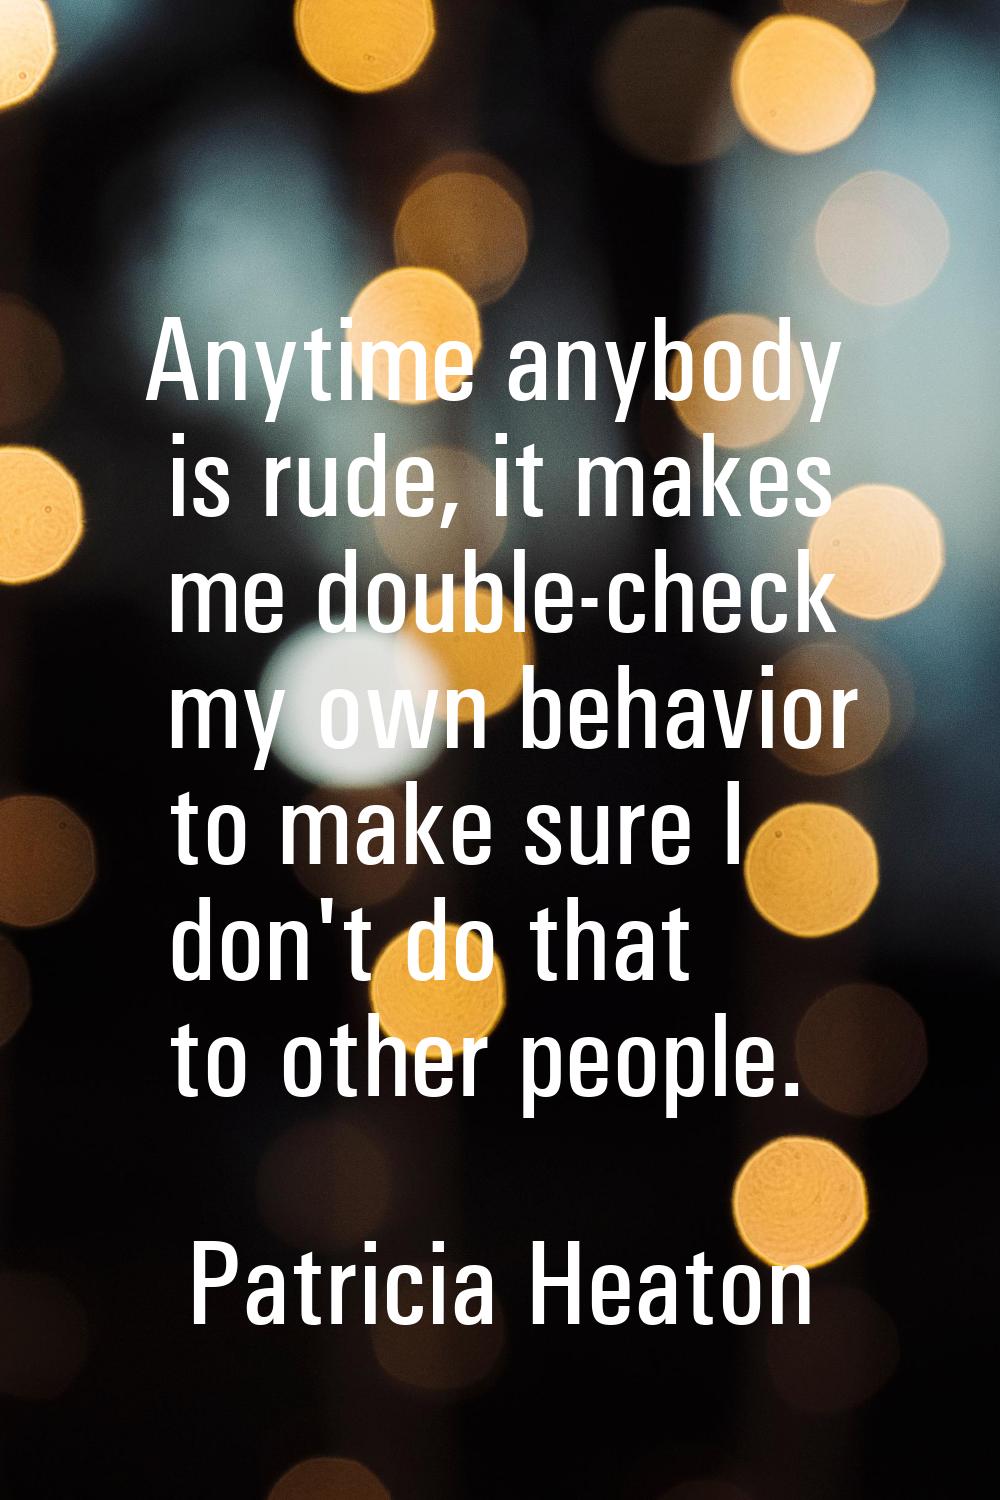 Anytime anybody is rude, it makes me double-check my own behavior to make sure I don't do that to o